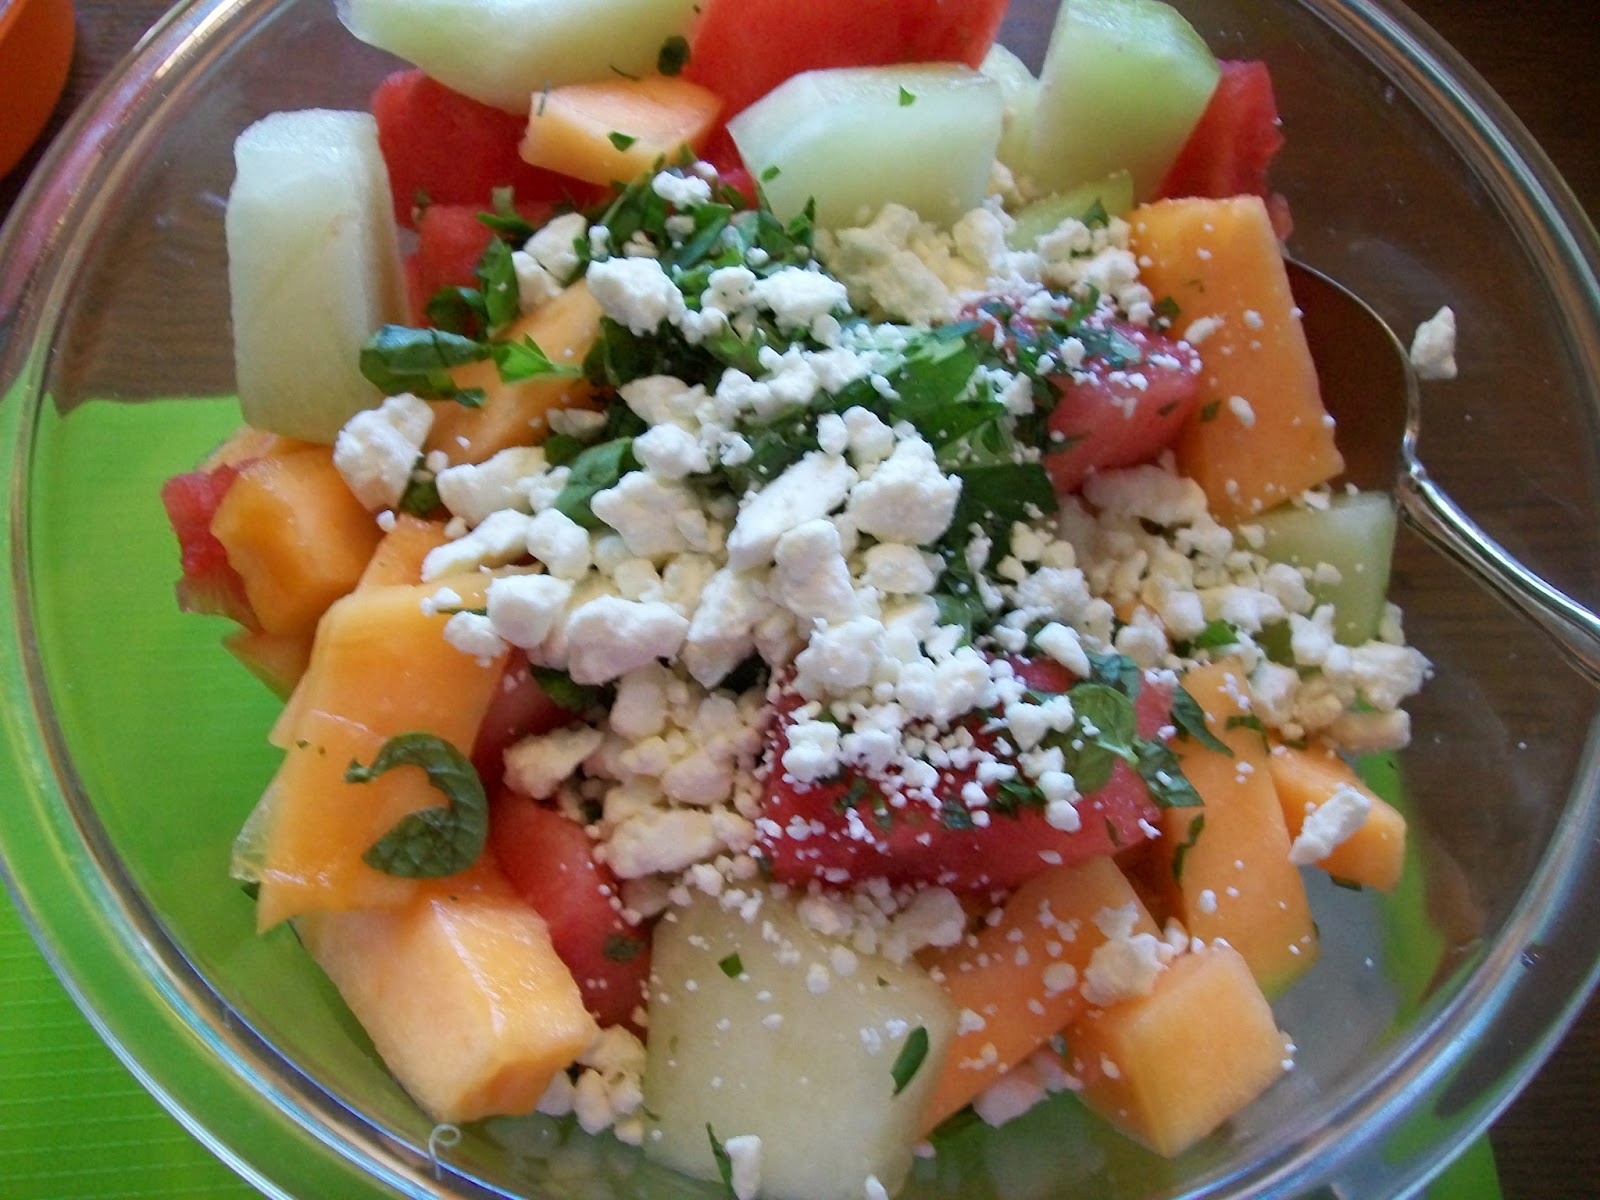 Michigan Cottage Cook: THREE MELON SALAD WITH FETA CHEESE